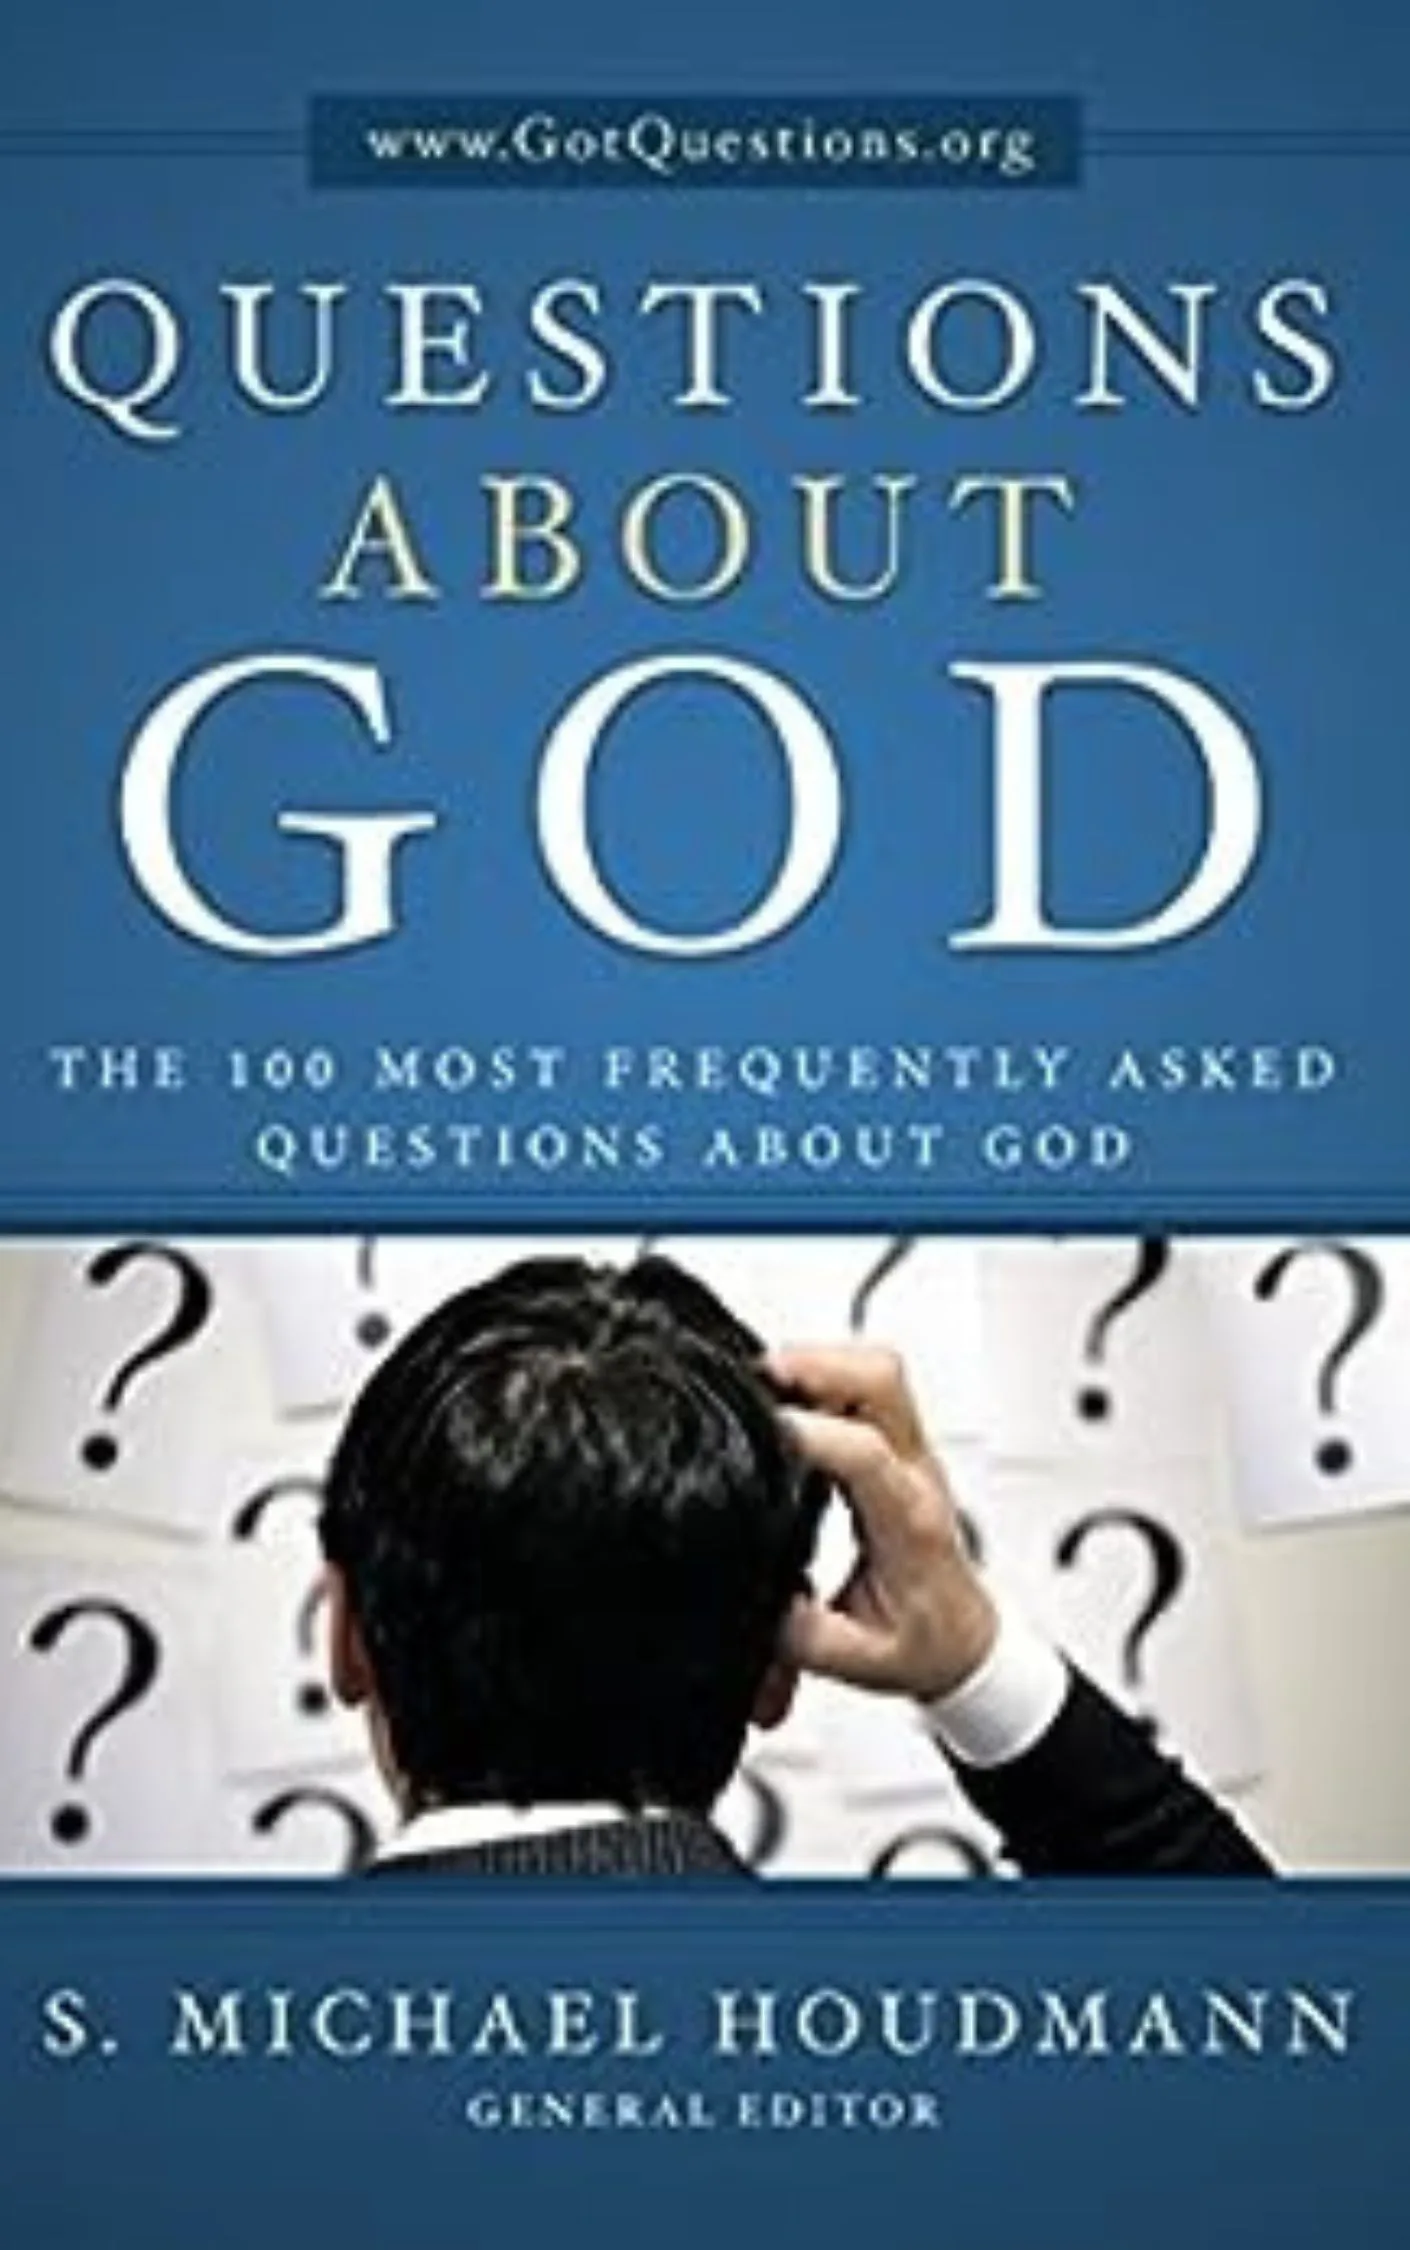 Questions about God - The 100 Most Frequently Asked Questions About God
By: S. Michael Houdmann